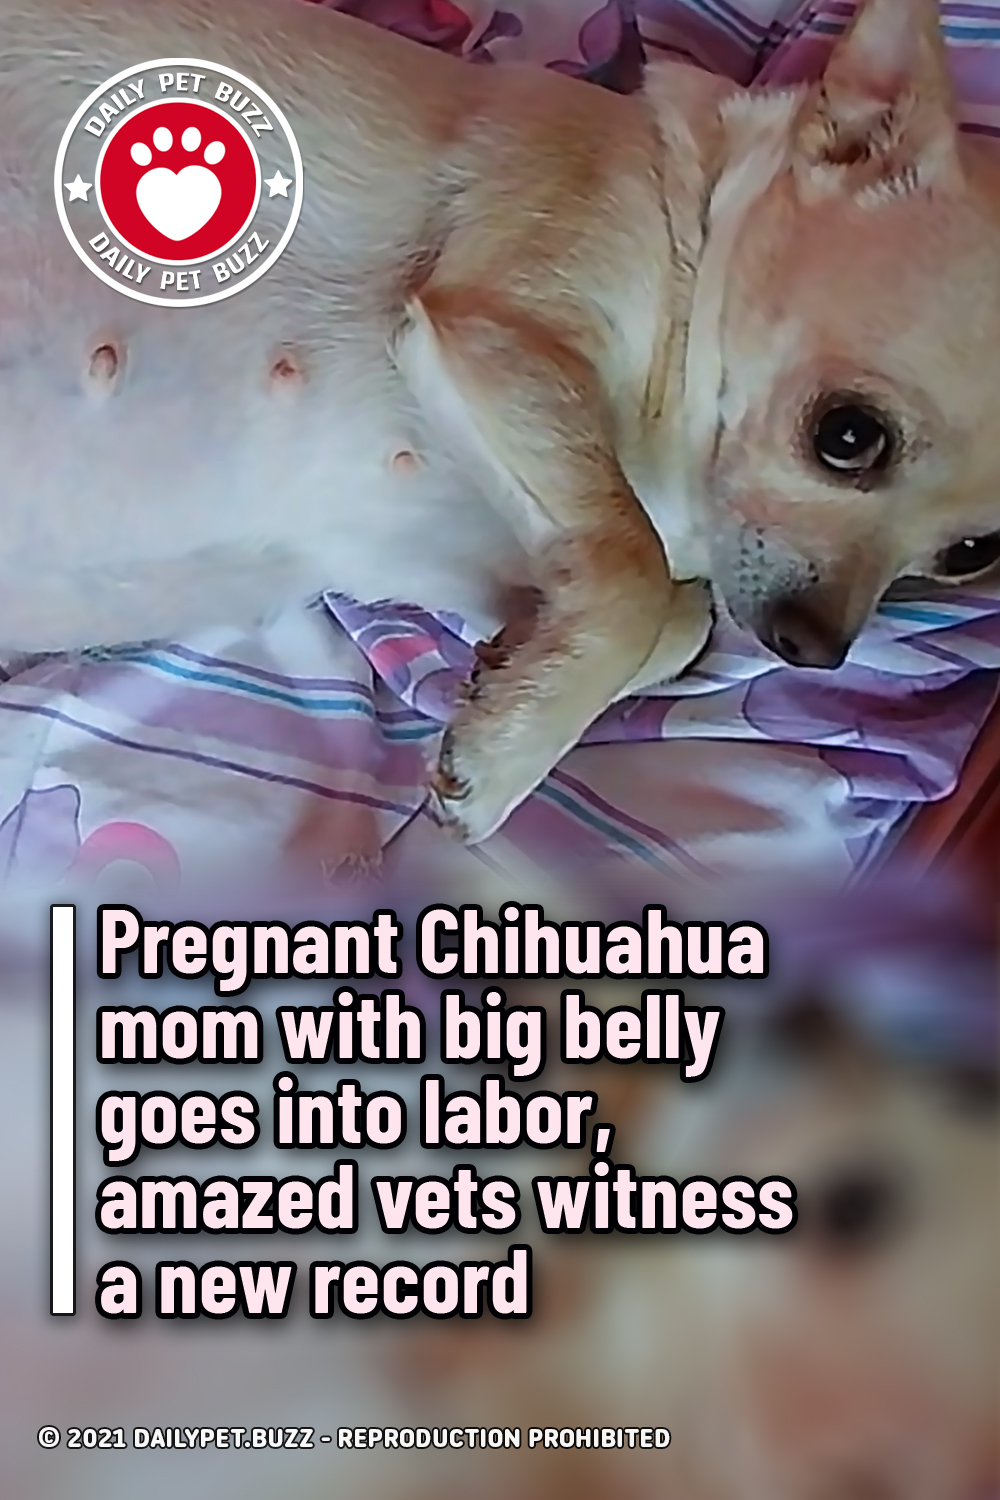 Pregnant Chihuahua mom with big belly goes into labor, amazed vets witness a new record